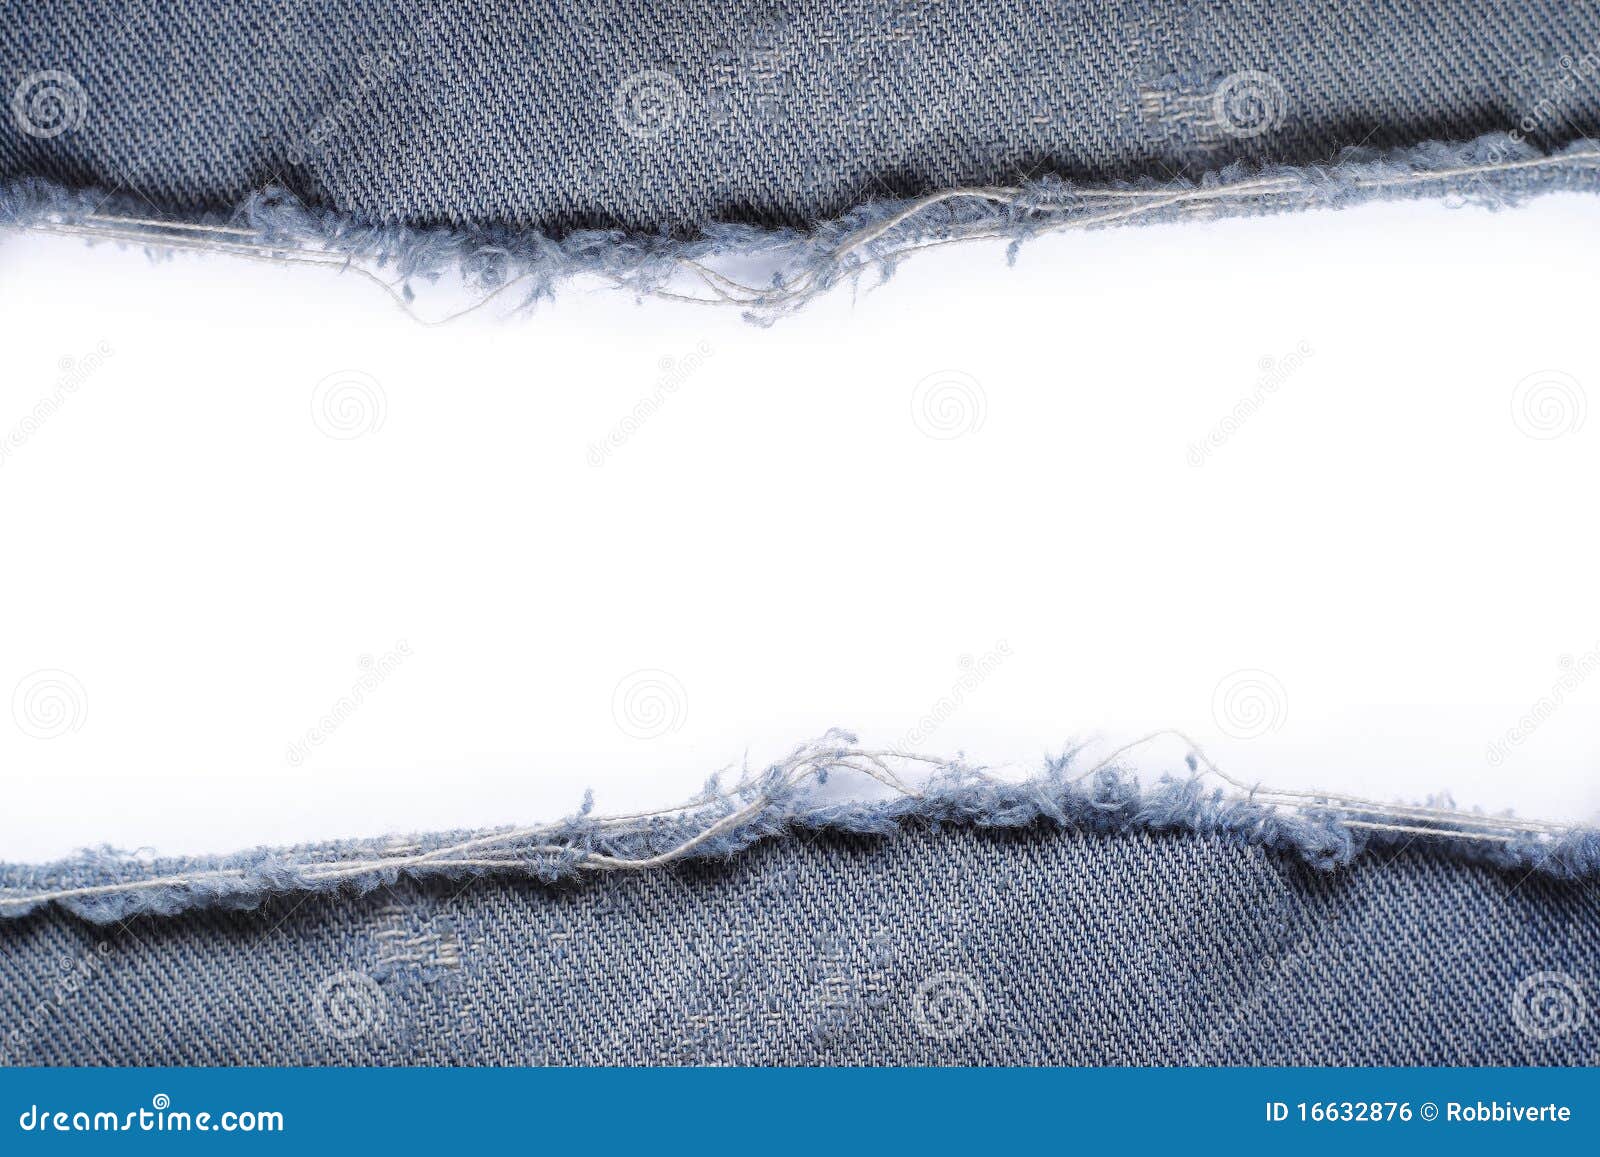 Jeans ripped stock photo. Image of casual, frame, navy - 16632876